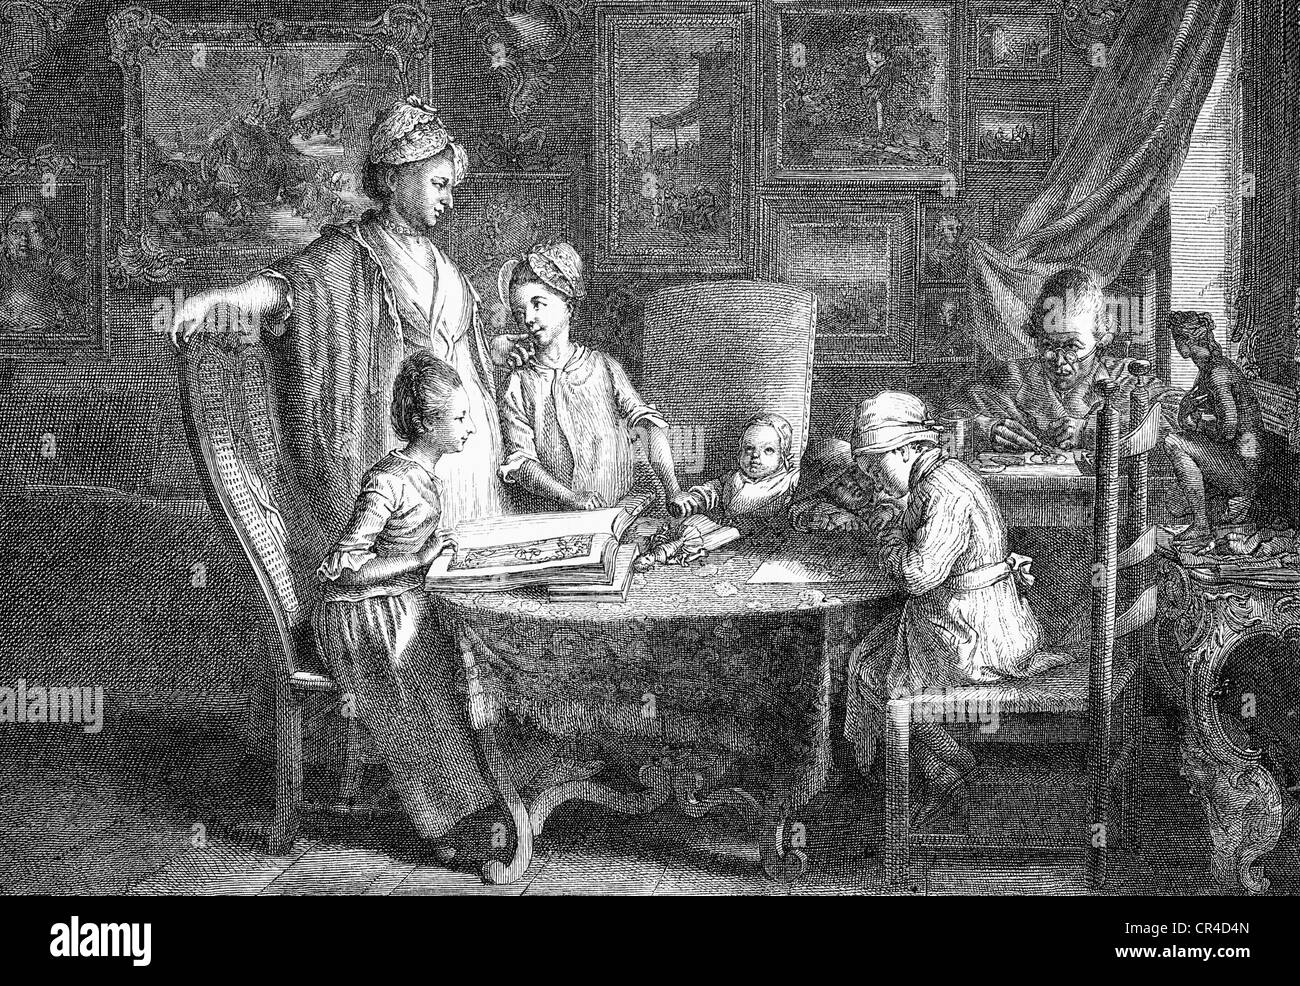 Daniel Nikolaus Chodowiecki (1726-1801), engraver and illustrator in his family, steel engraving, before 1880 Stock Photo